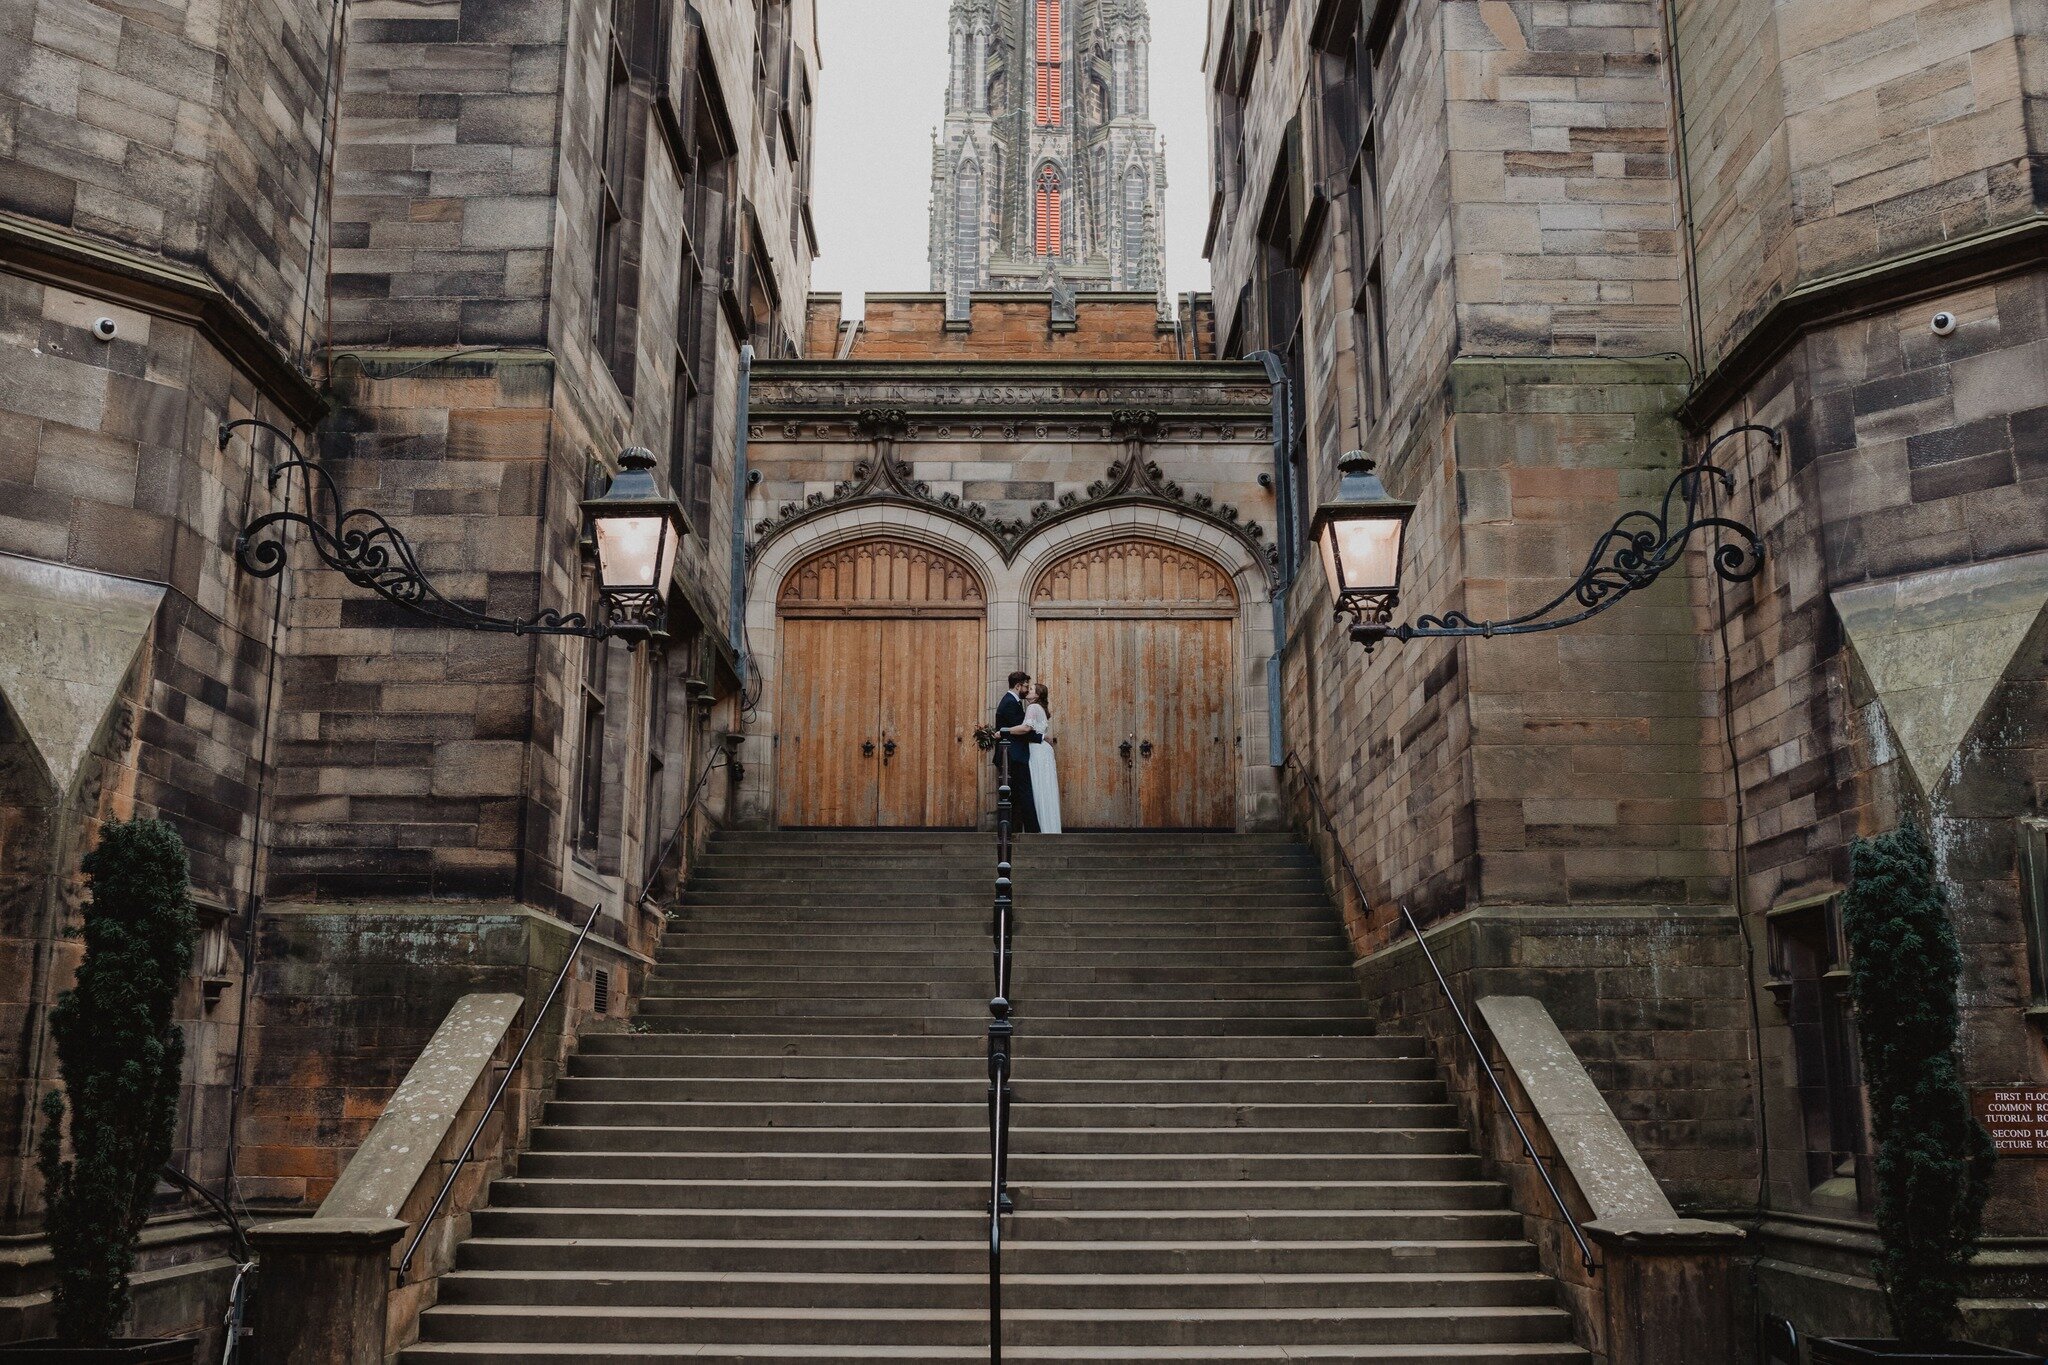 // Edinburgh //

It feels like ages since my last Edinburgh wedding and so it was extra special to get back out in the old town this week with the incredible P + J.

Here's a sneak peek...

A wee wedding ceremony, a Royal Mile confetti throw and a ro